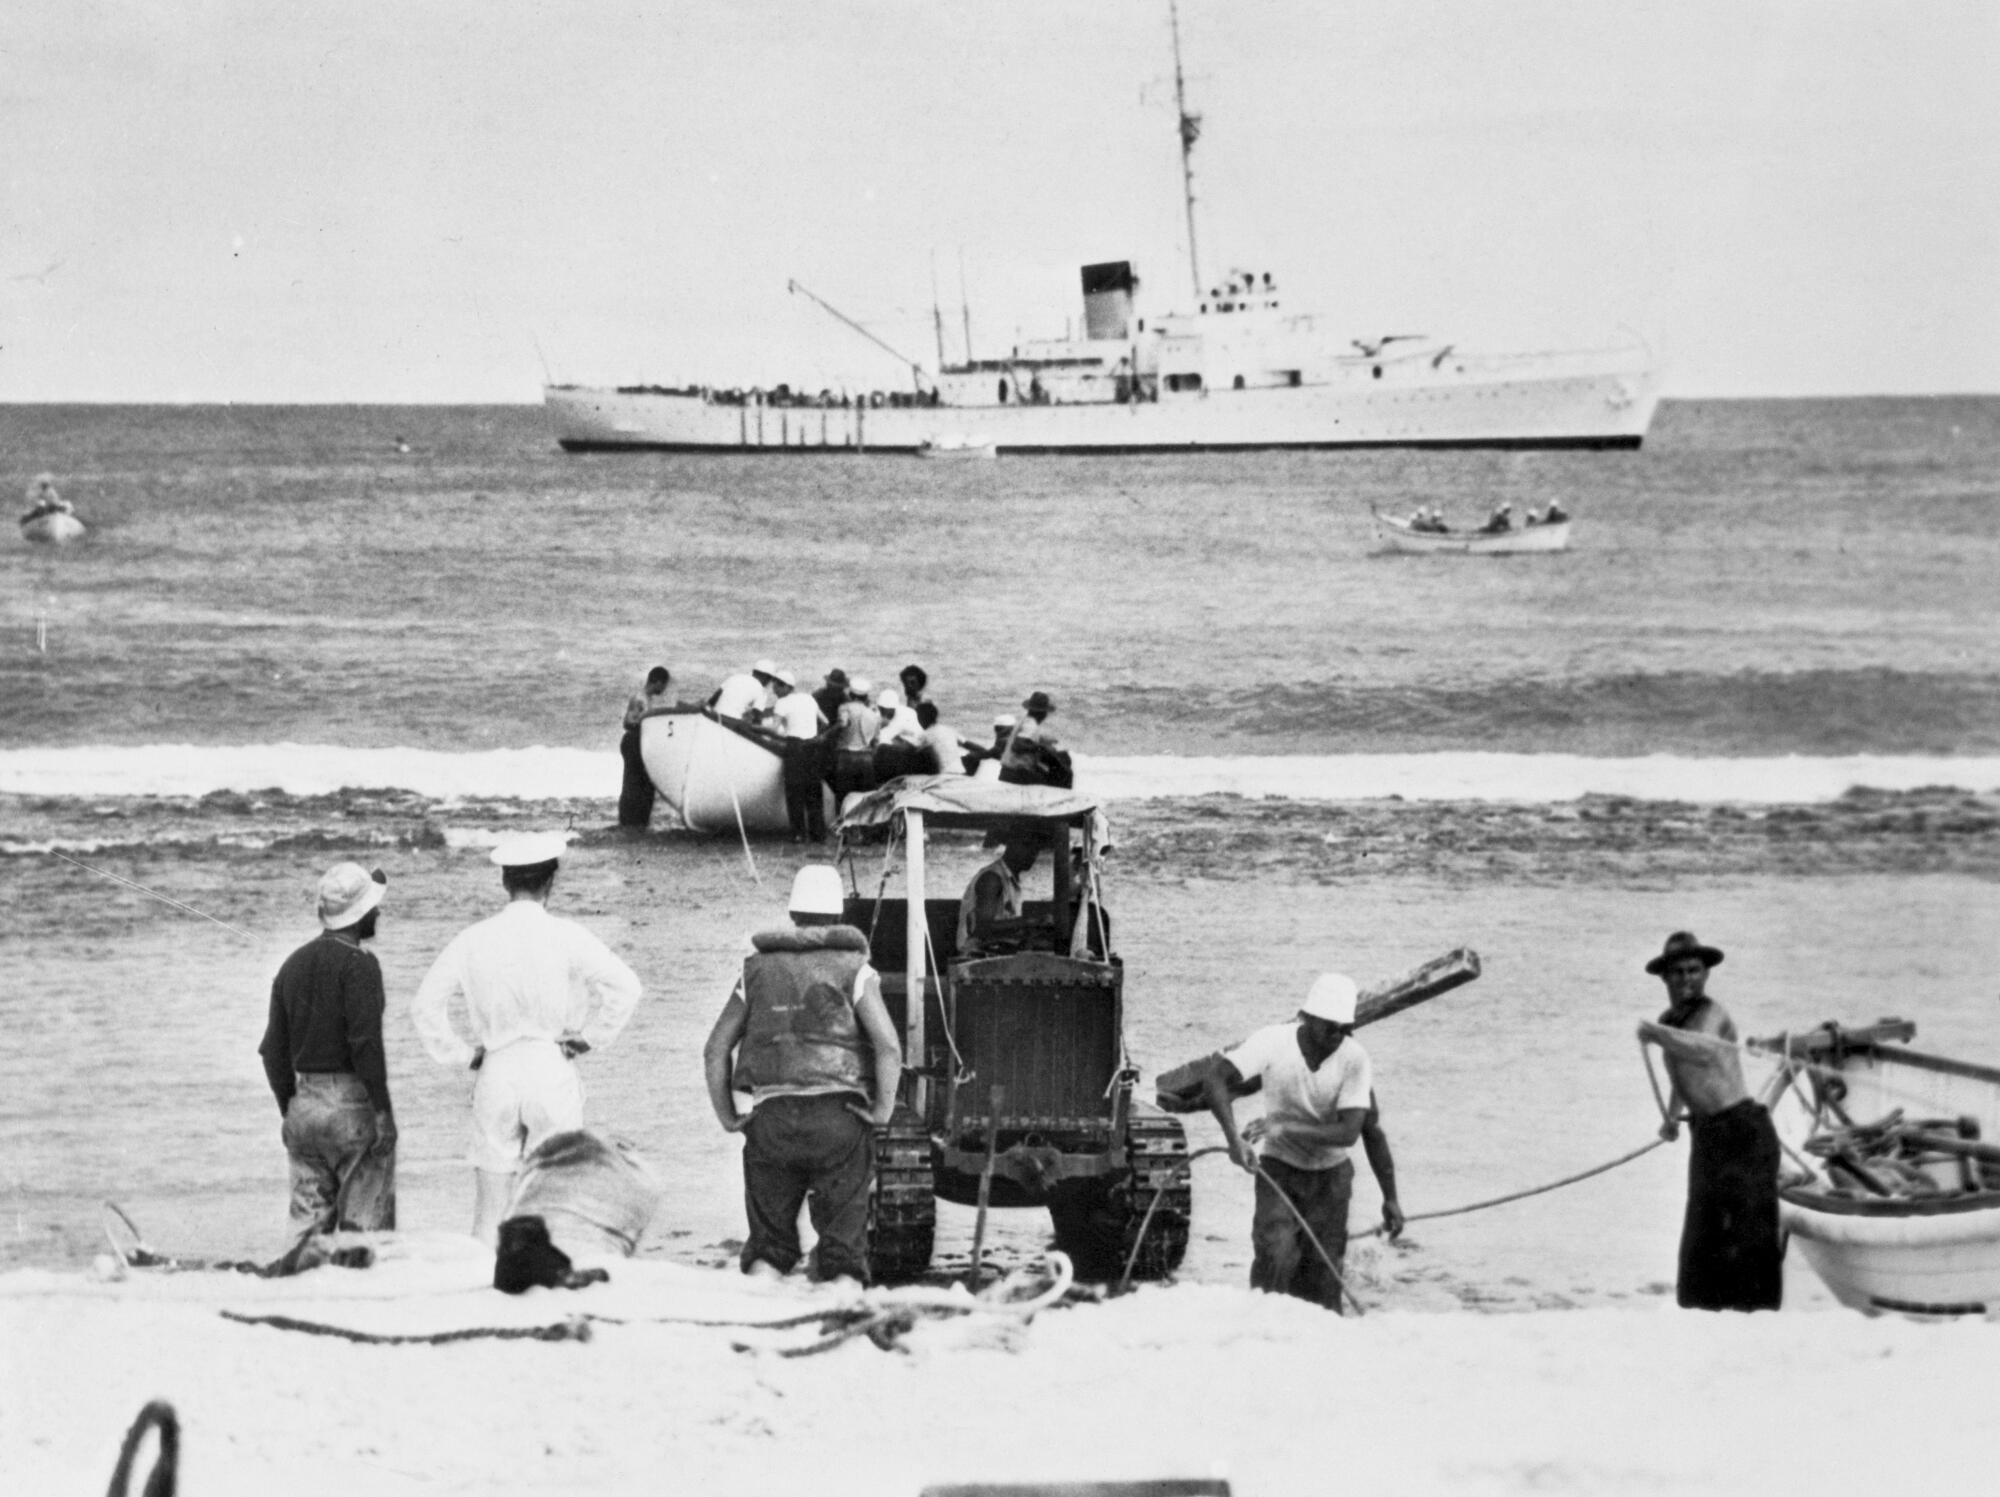 People on a beach with a tractor carry equipment as others beach a small boat while a larger ship lies in the background.